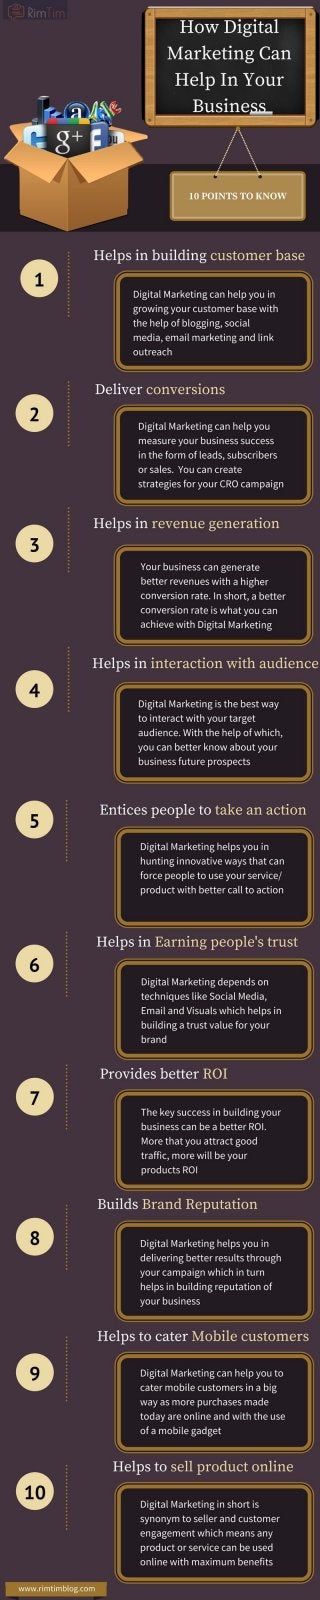 How digital marketing helps in your business 